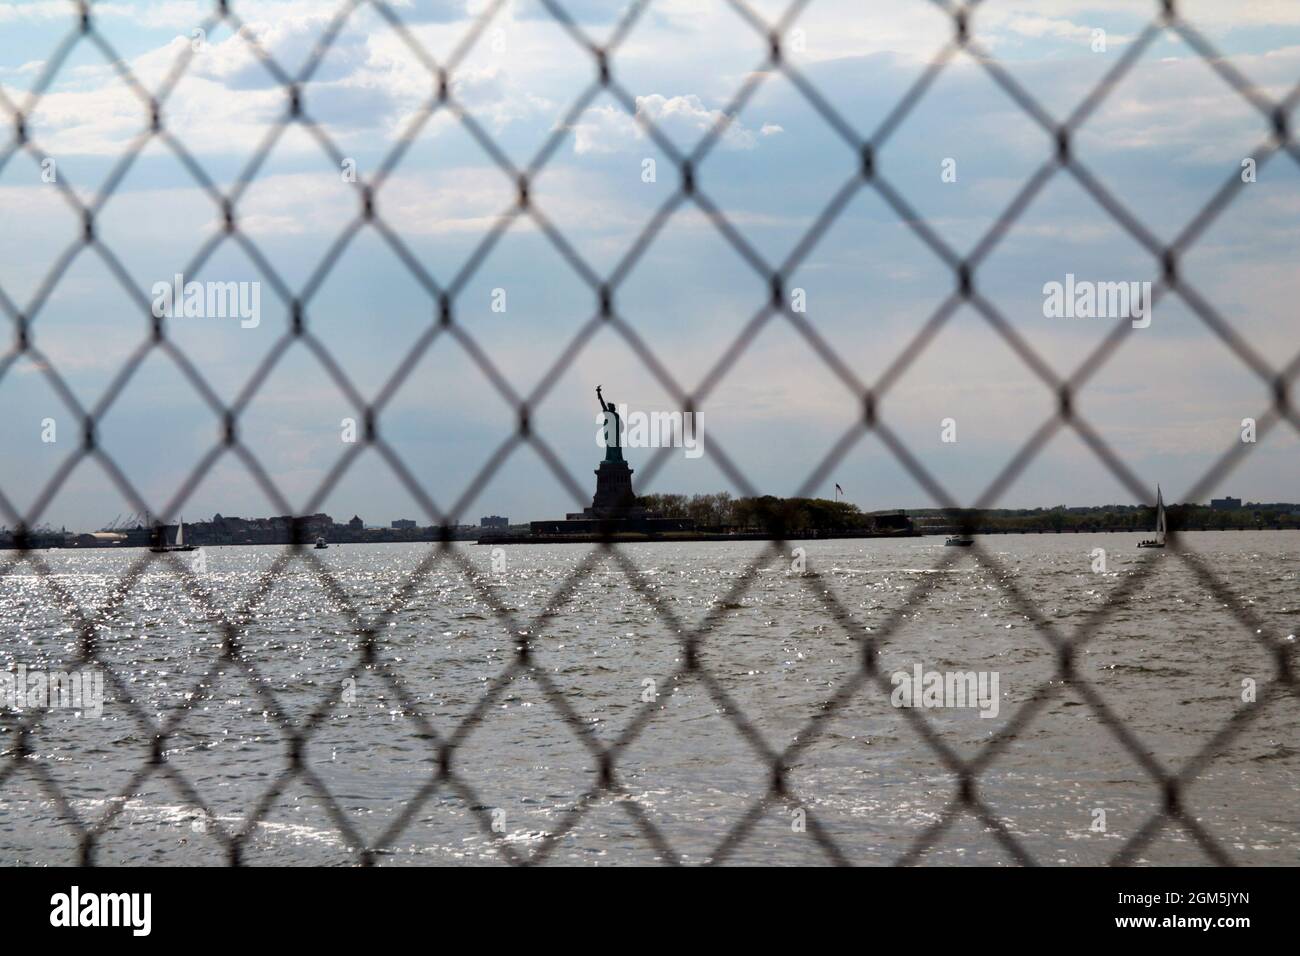 The freedom of Lady liberty behind the cage in New York City Stock Photo